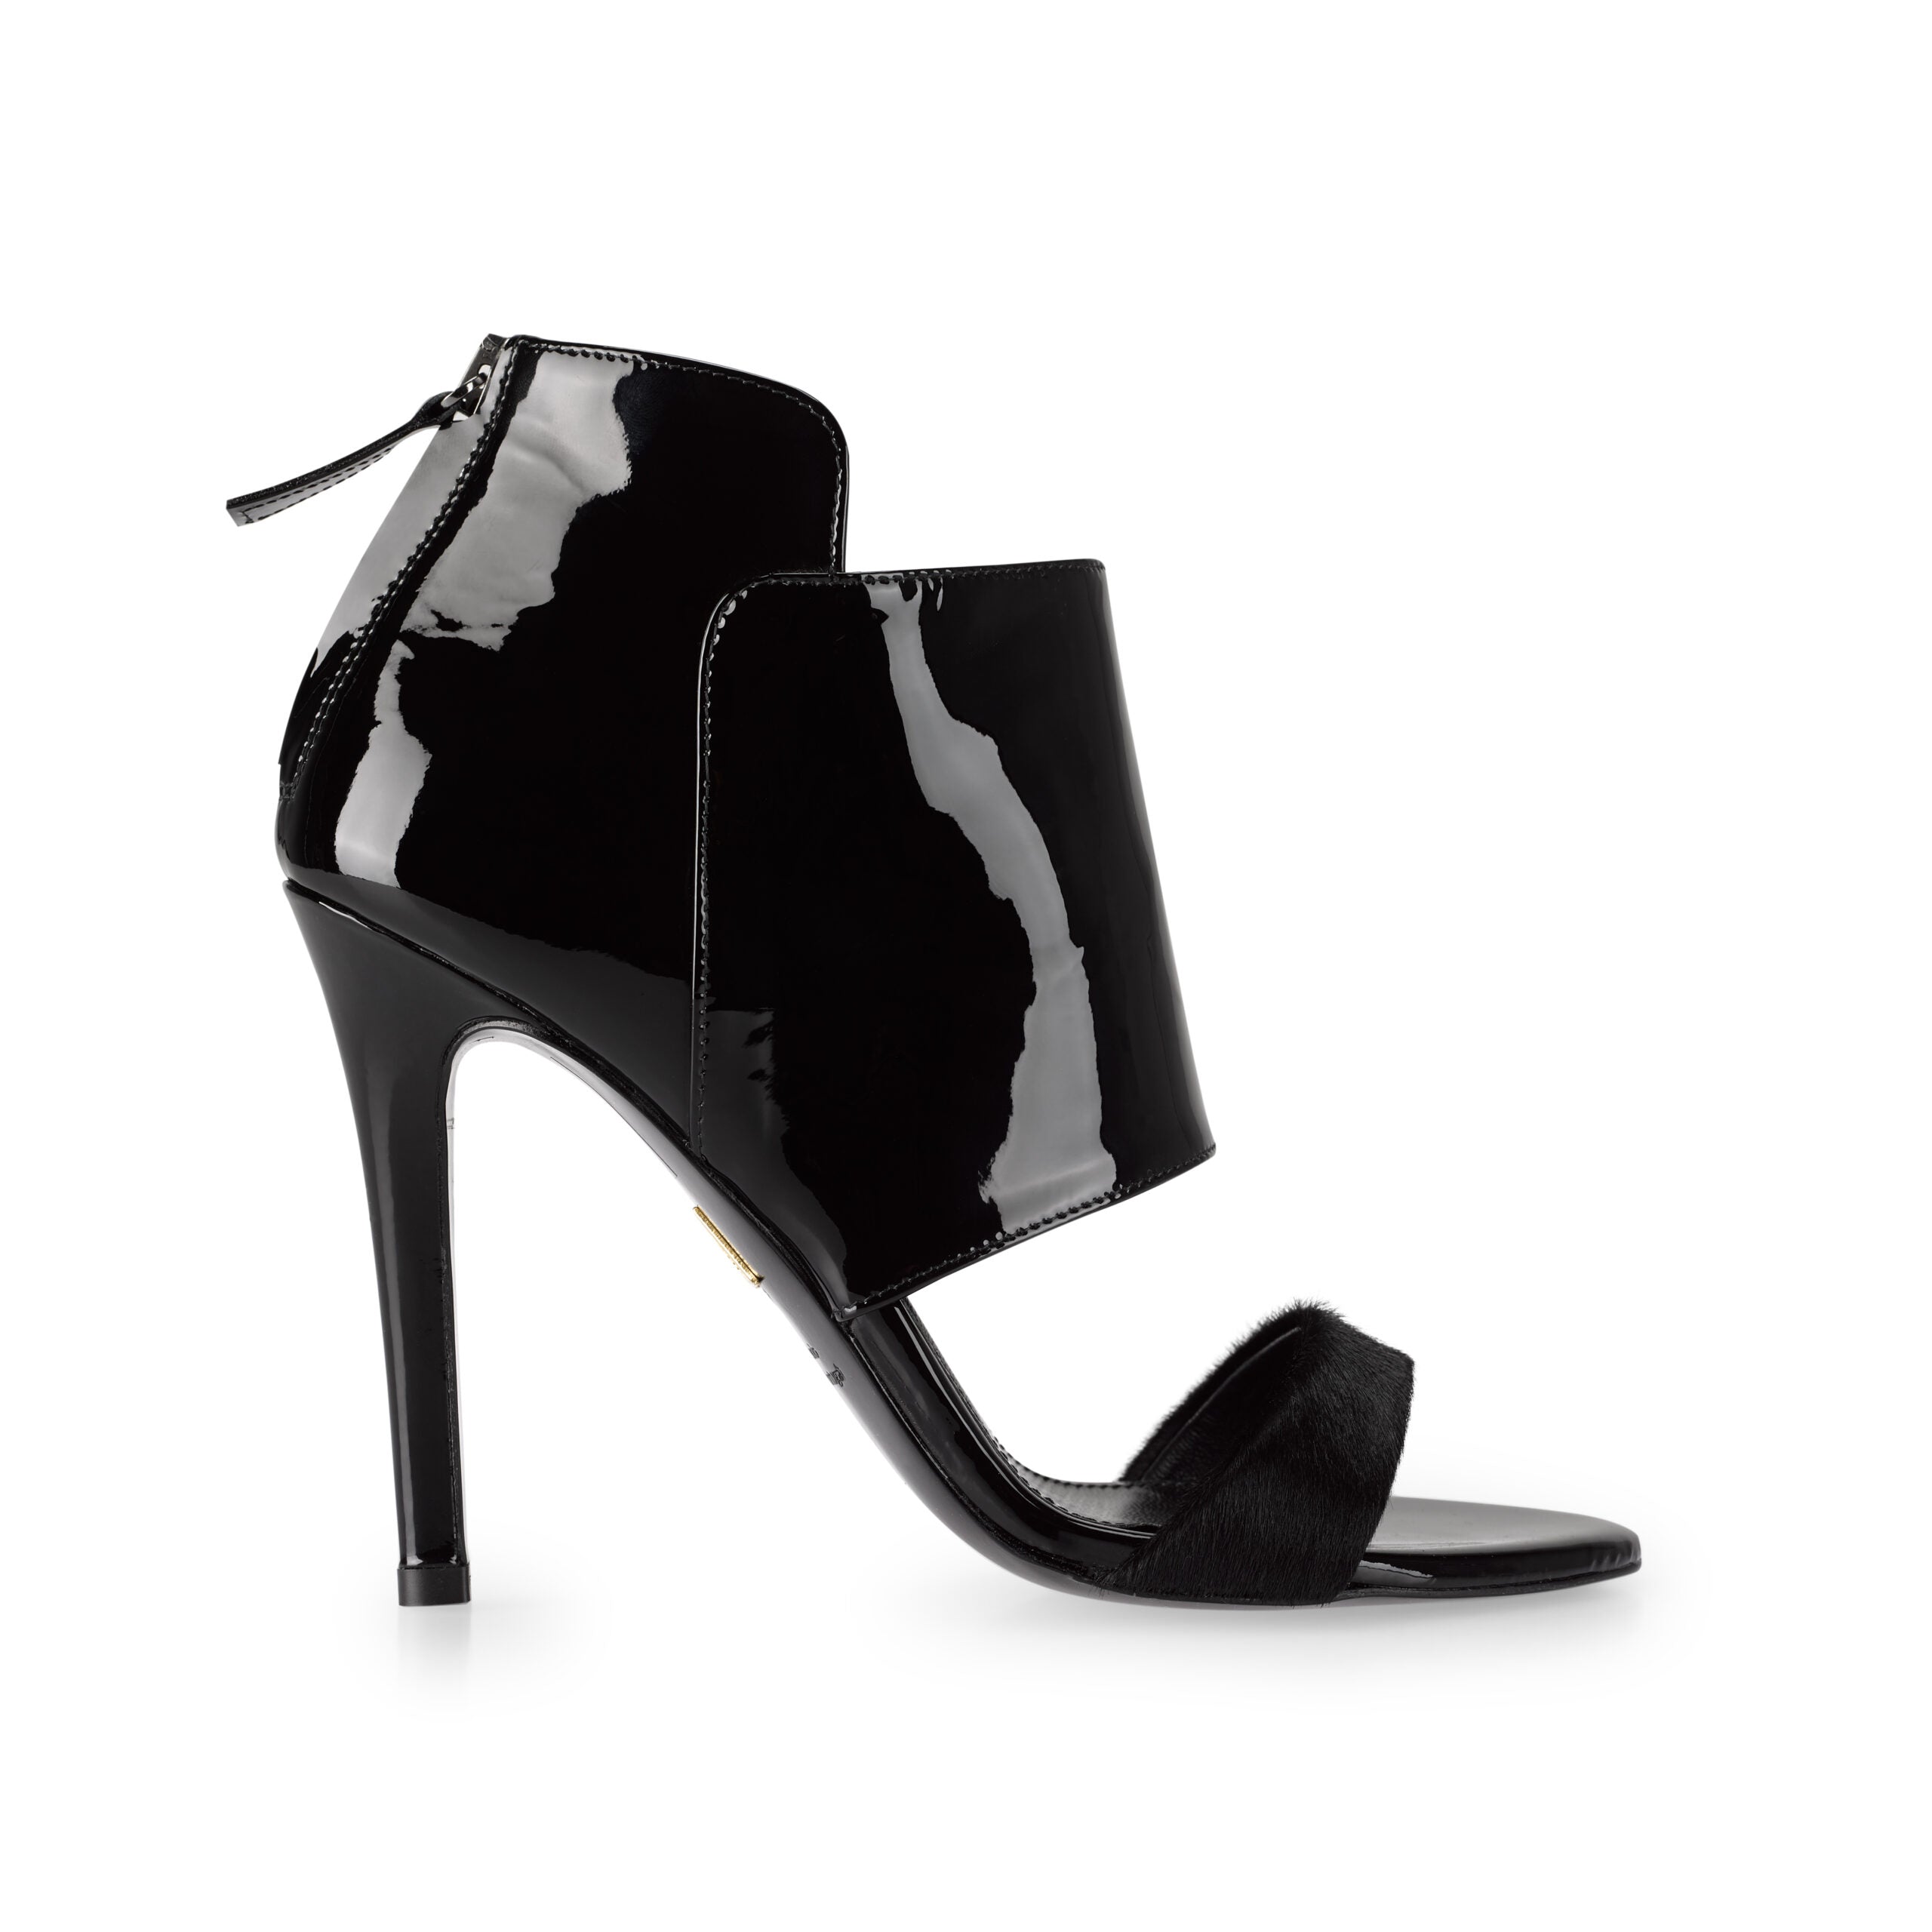 Handcrafted in portugal from black patent leather, the pair sits on a classic stiletto heel.